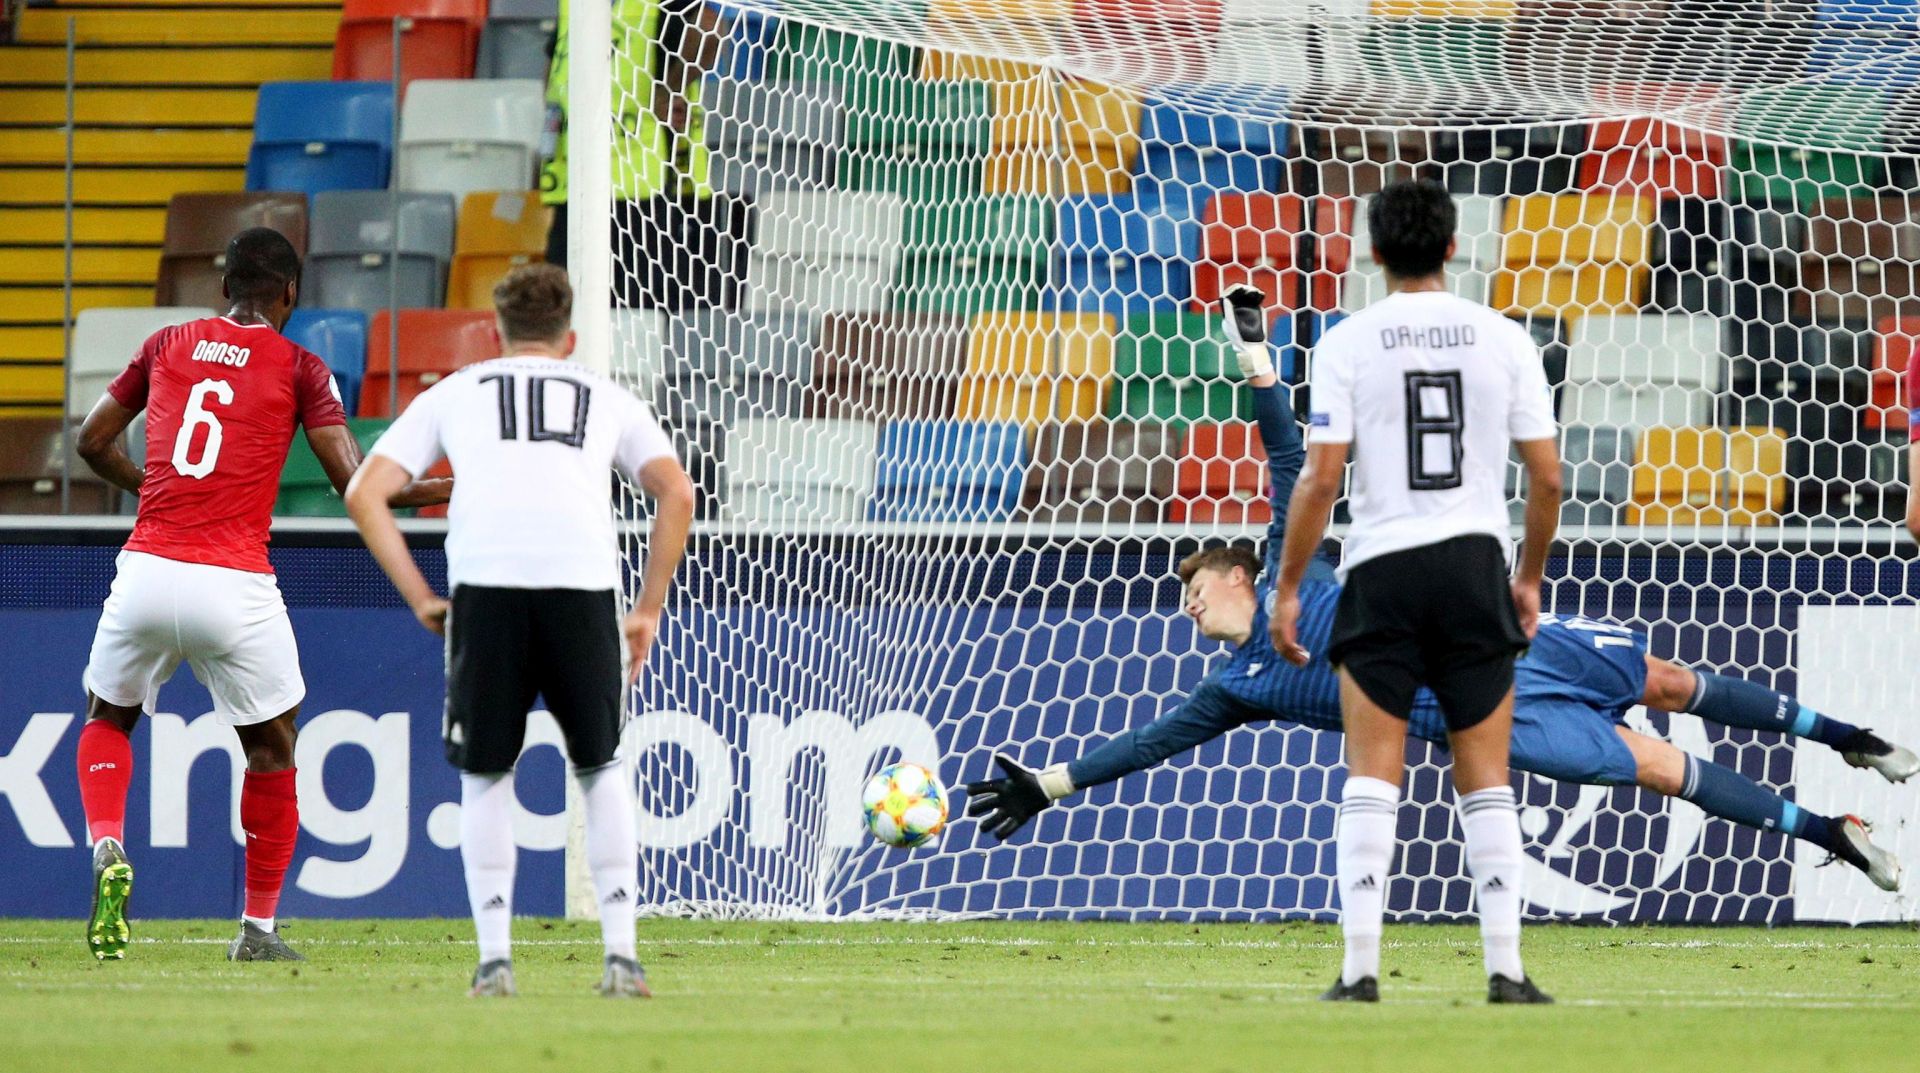 epa07669440 Austria's Kevin Danso (L) scores from the penalty spot the goal 1-1 during the Uefa European Under-21 Championship 2019 - Group B match between Austria and Germany in Udine, Italy, 23 June 2019.  EPA/GABRIELE MENIS